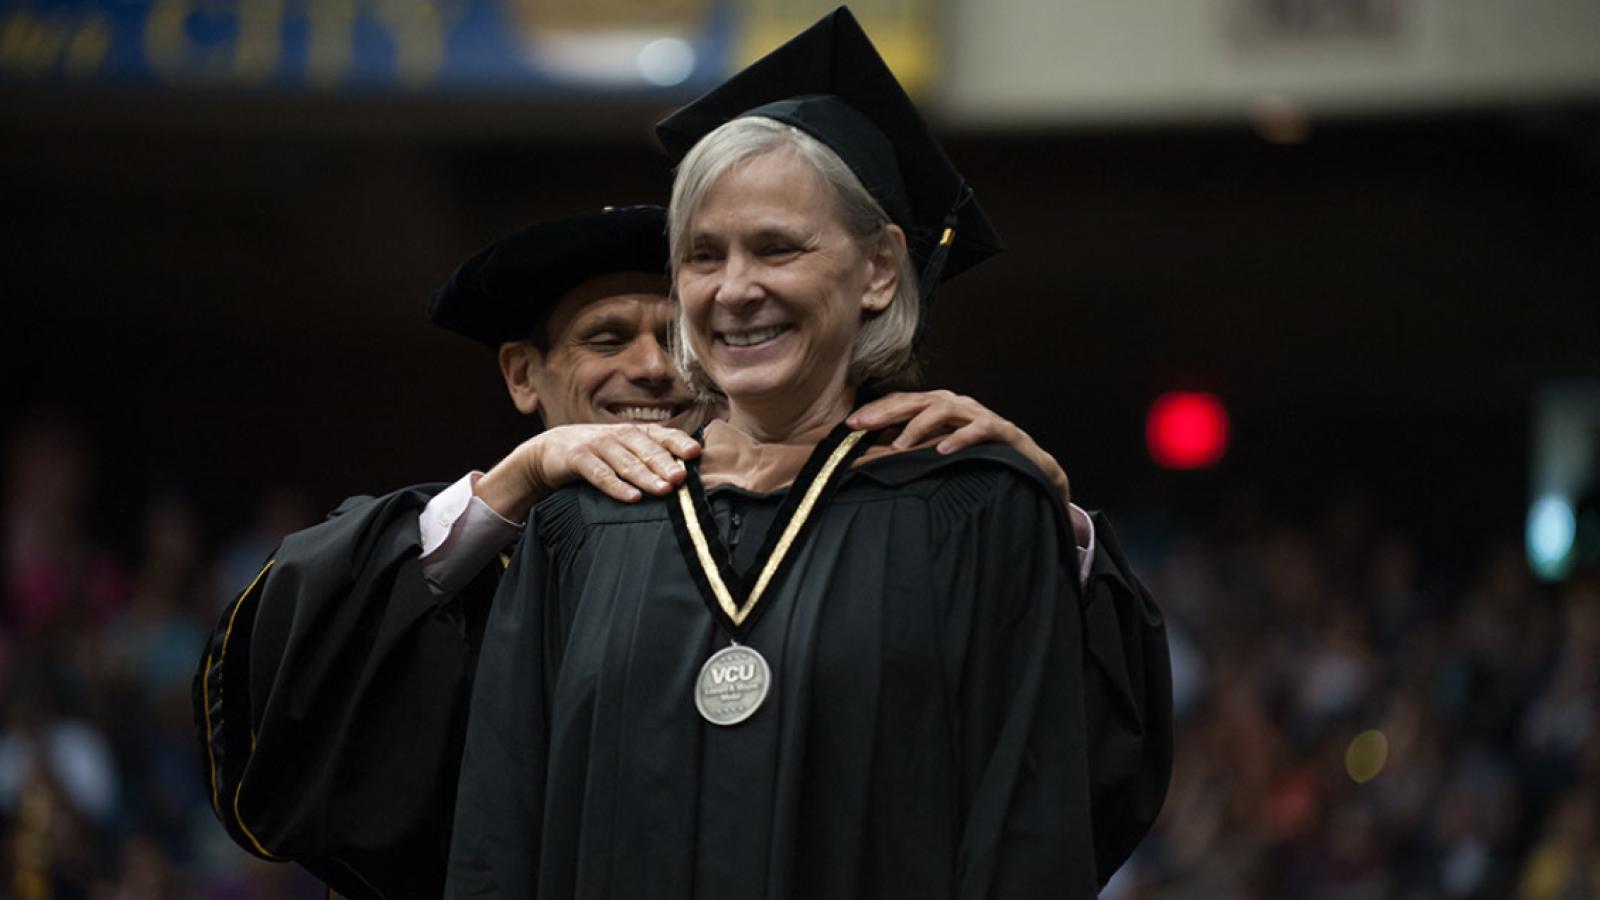 Ginny Crone receives the Edward A. Wayne Medal at VCU's commencement on May 12.